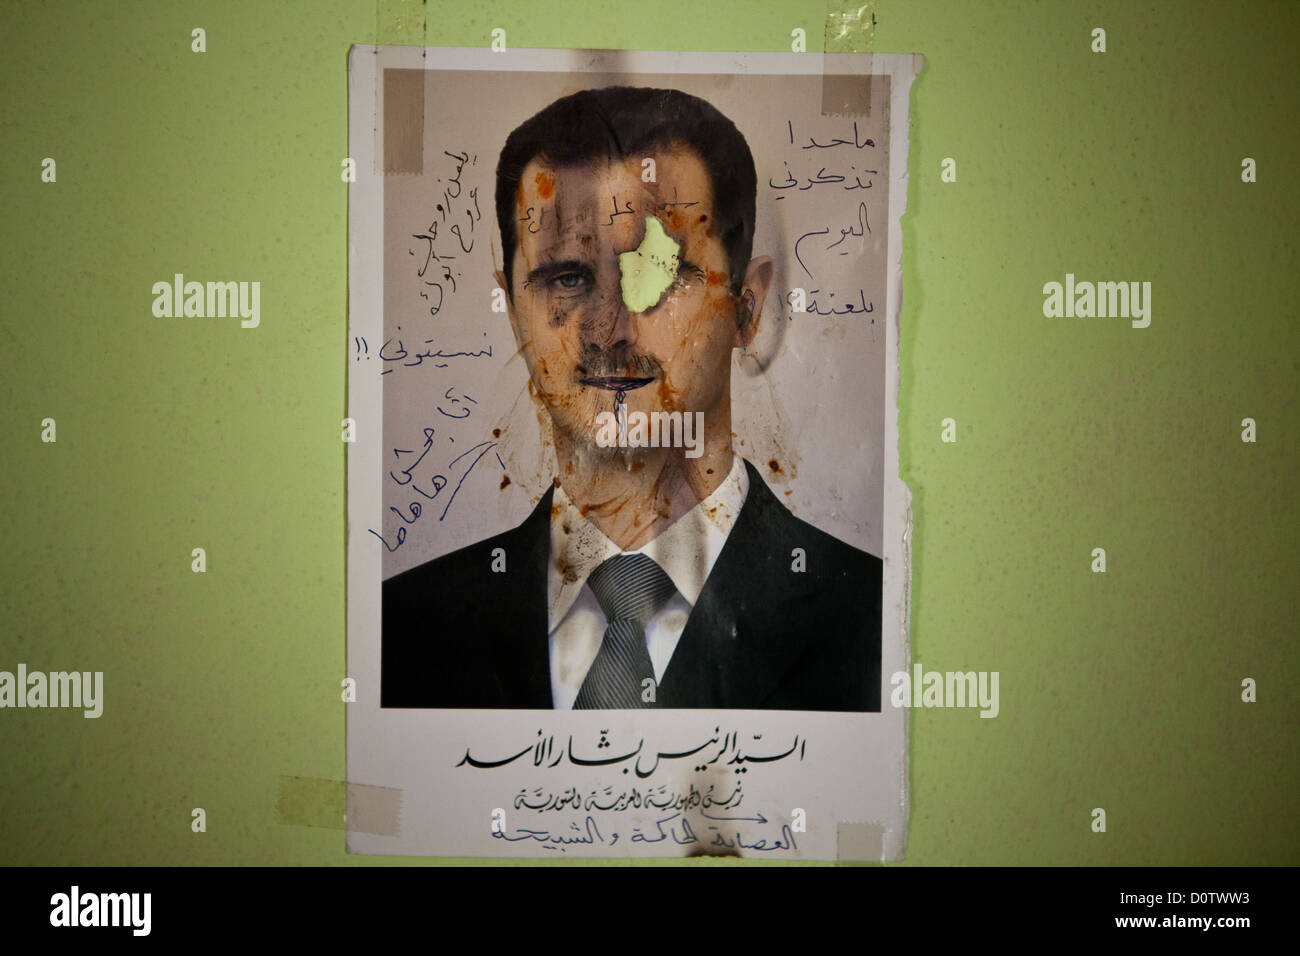 01/10/12, Syria. Photograph of Bashar al-Assad adorns a hospital wall. A patient who had lost an eye took a lighter to it. Stock Photo